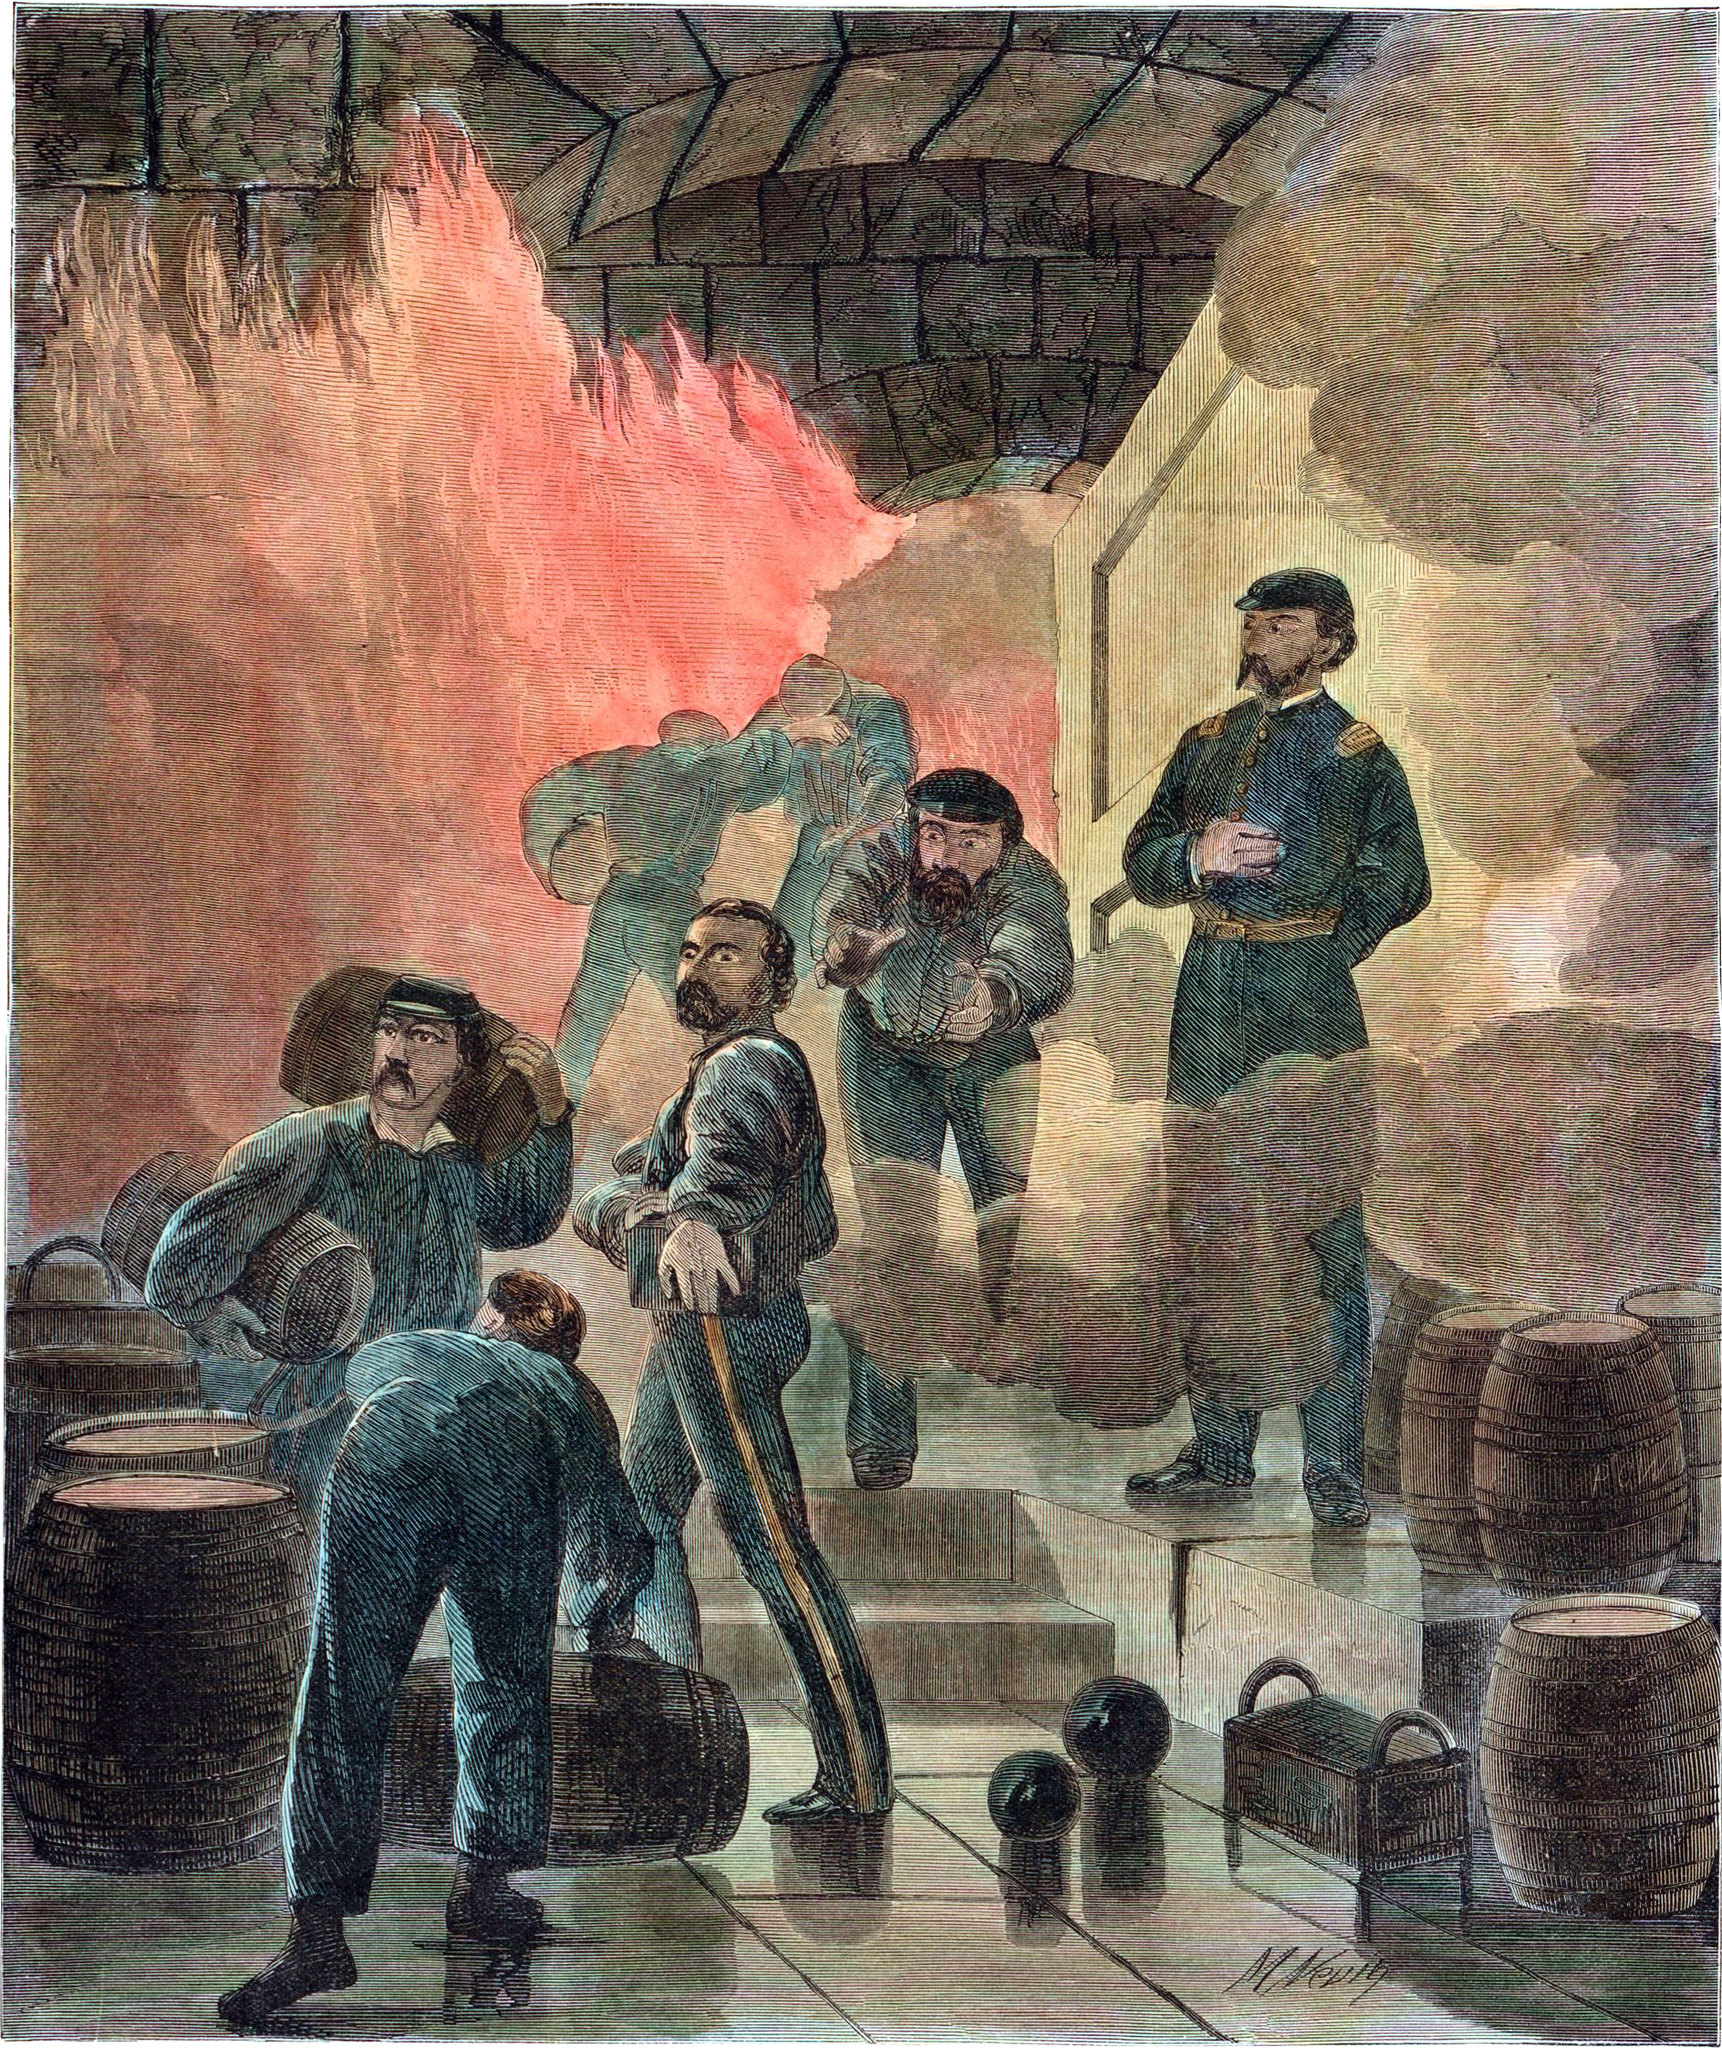 Removing Powder from the Magazine of Fort Sumter during the Bombardment